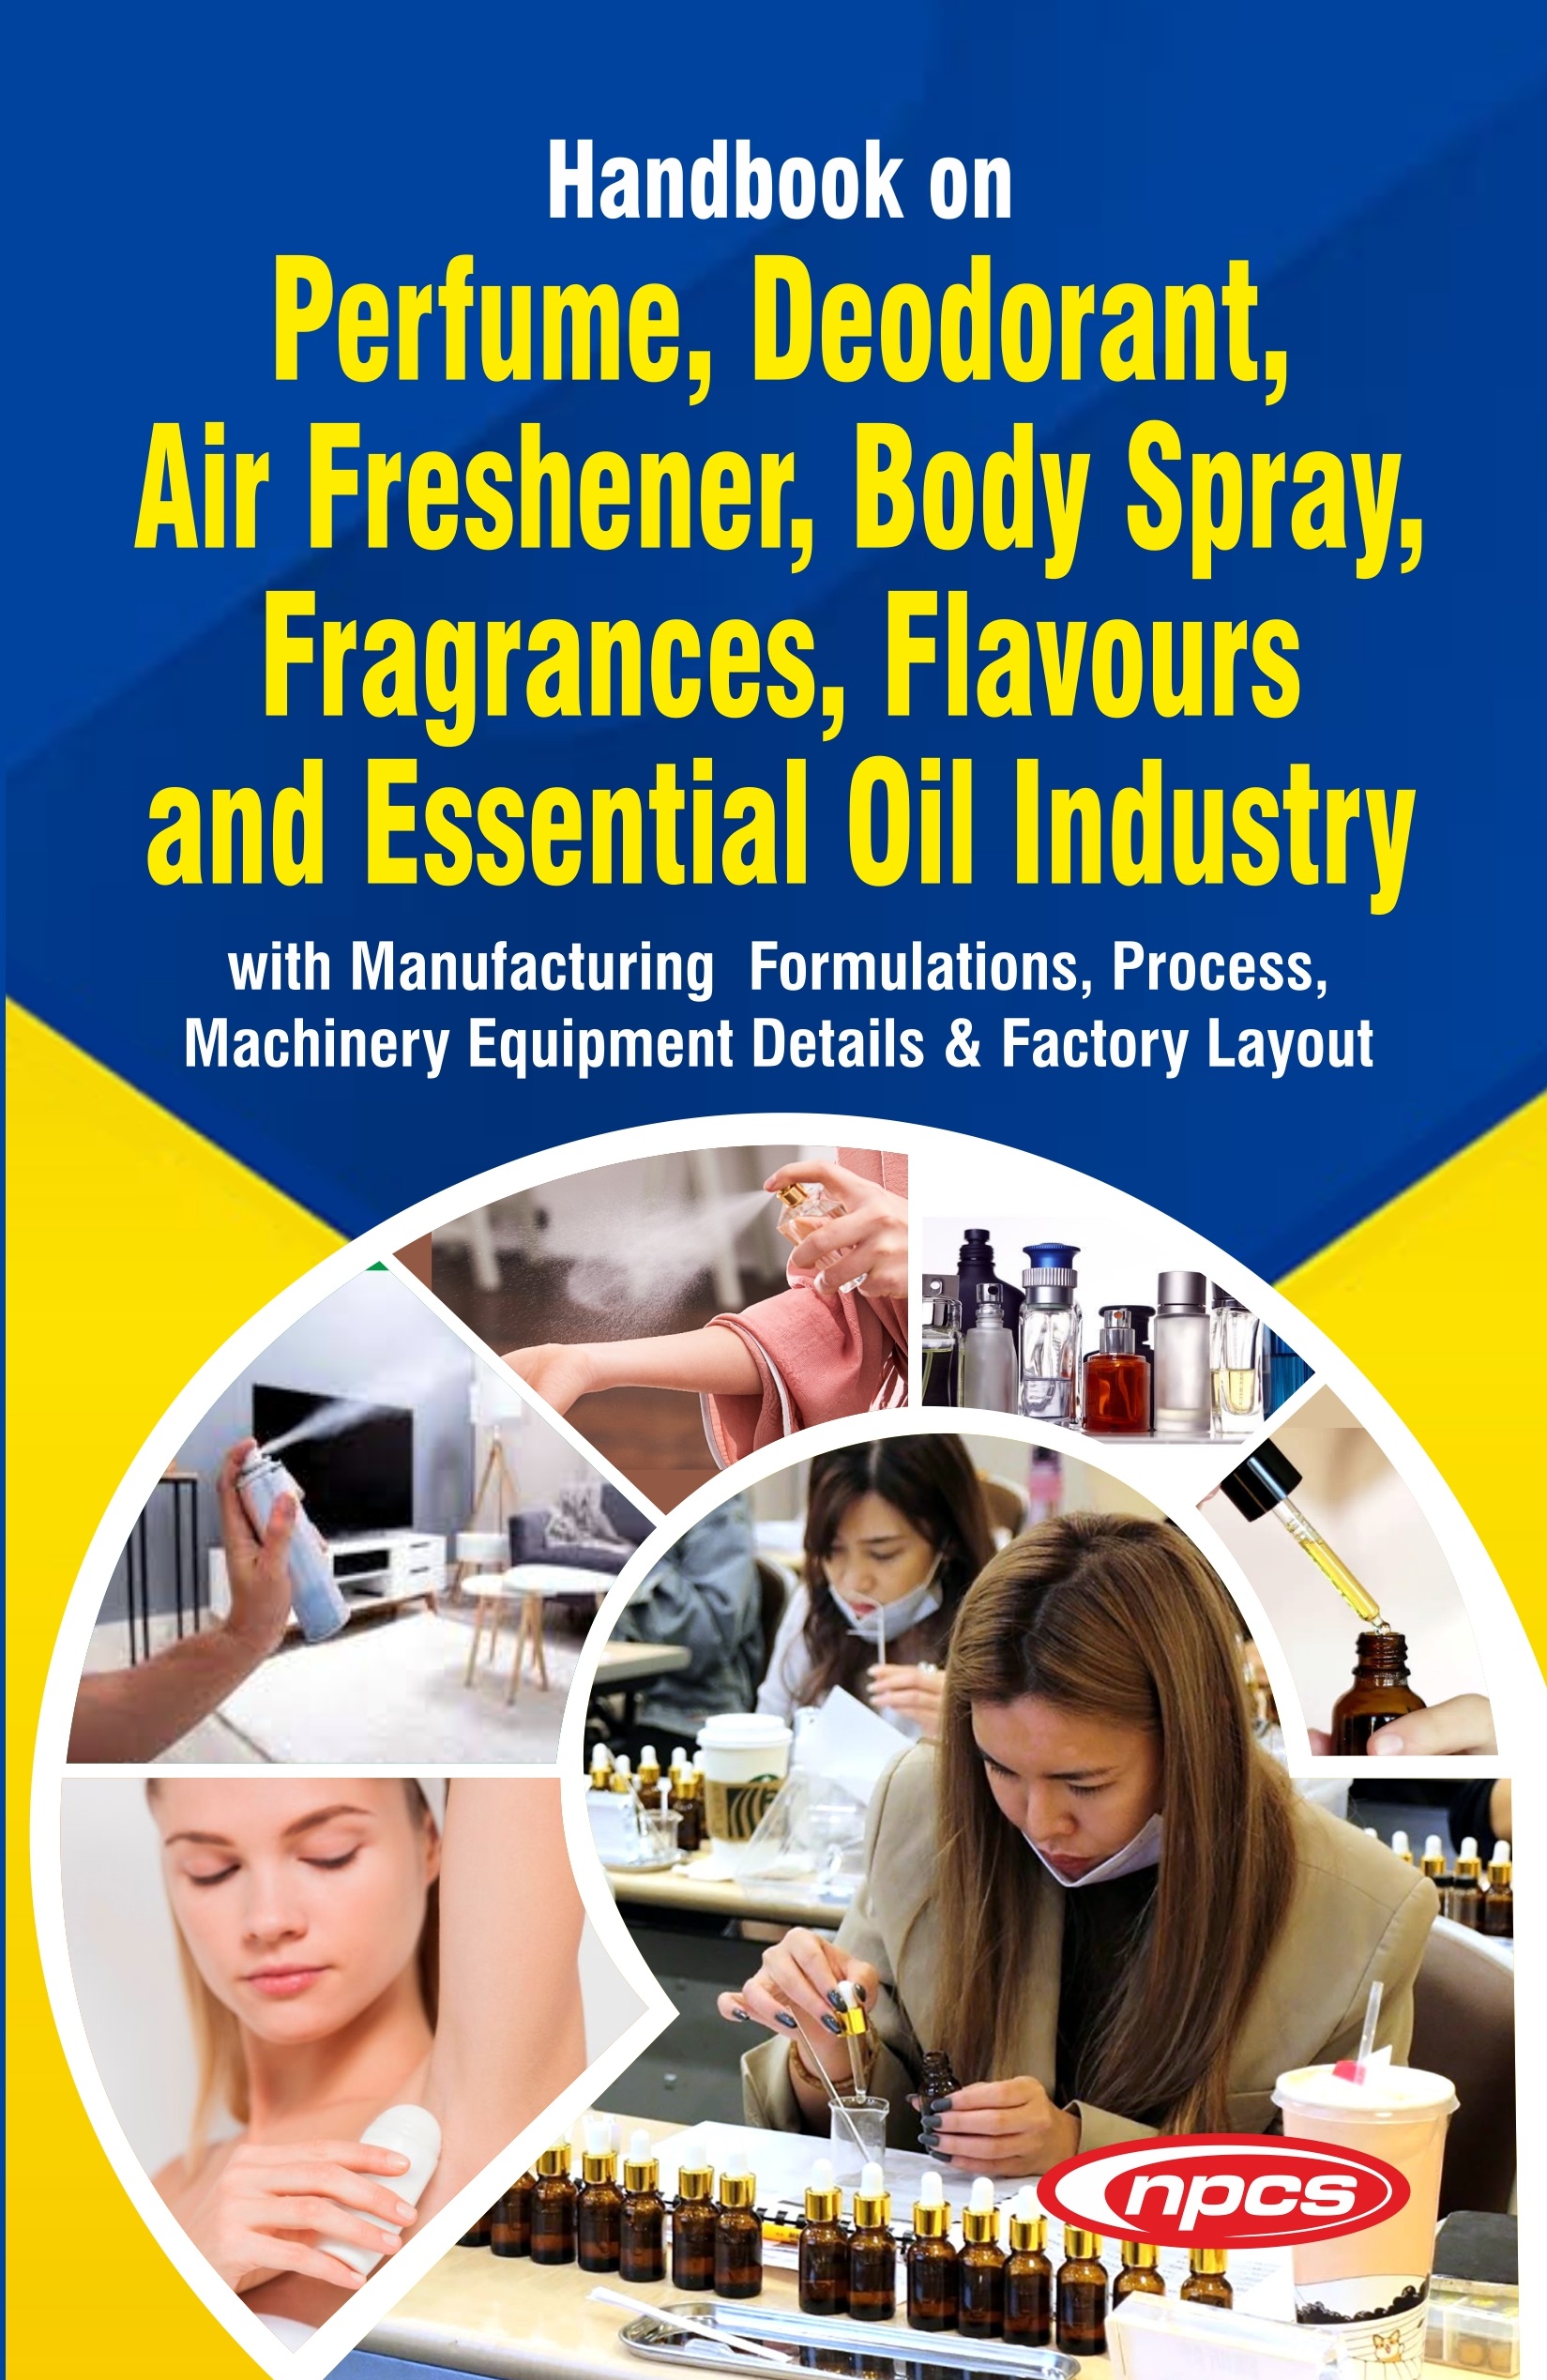 Handbook on Perfume, Deodorant, Air Freshener, Body Spray, Fragrances, Flavours and Essential Oil Industry with Manufacturing  Formulations, Process, Machinery Equipment Details & Factory Layout